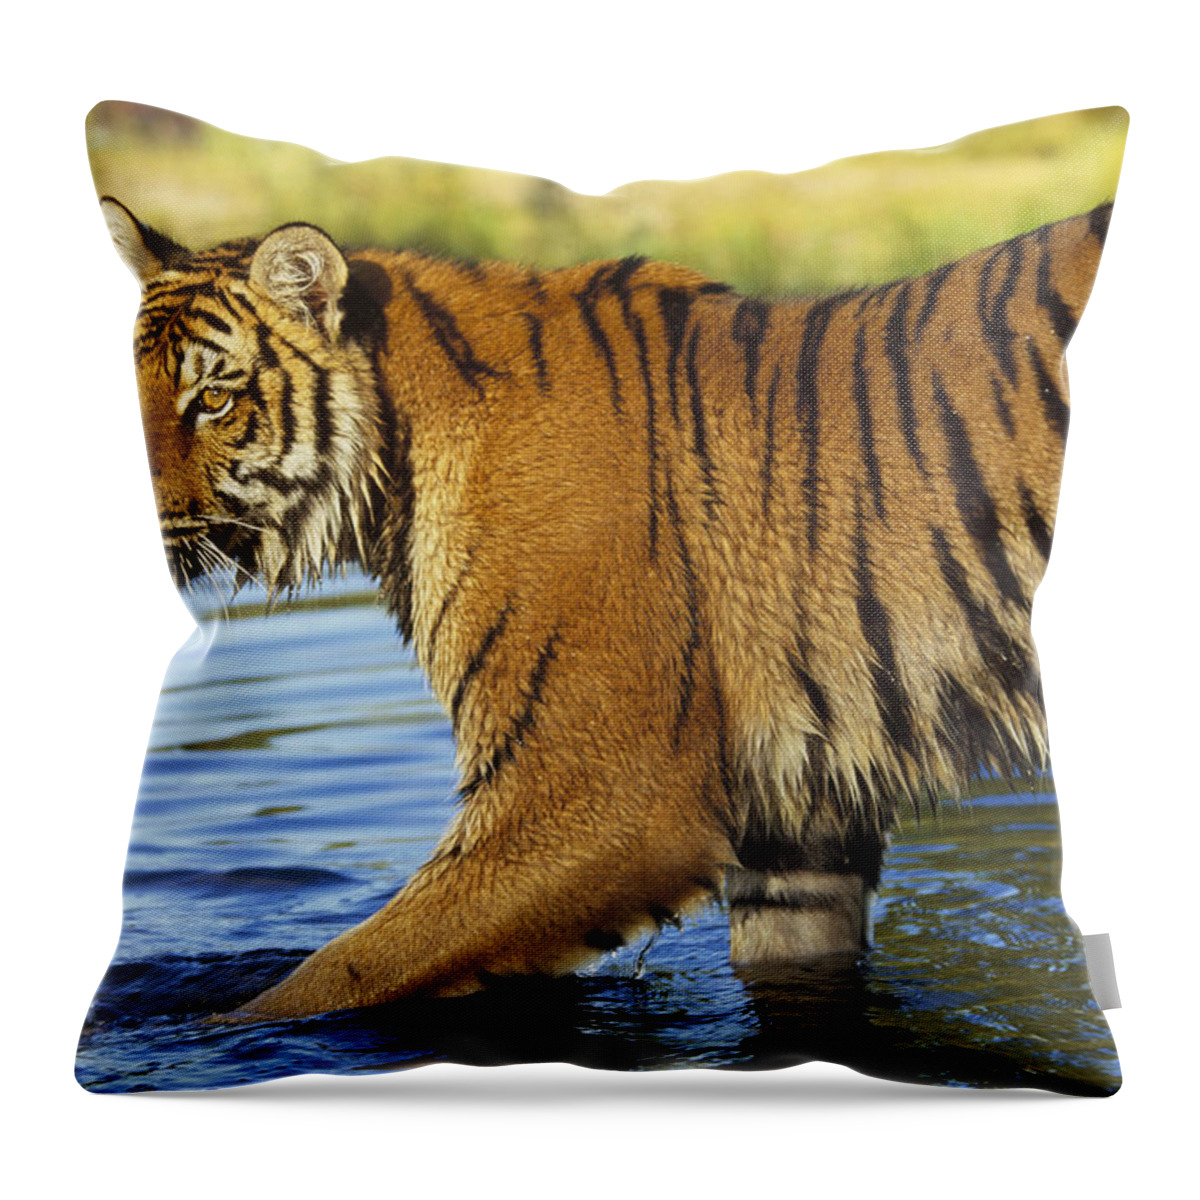 00172617 Throw Pillow featuring the photograph Siberian Tiger Walking by Tim Fitzharris